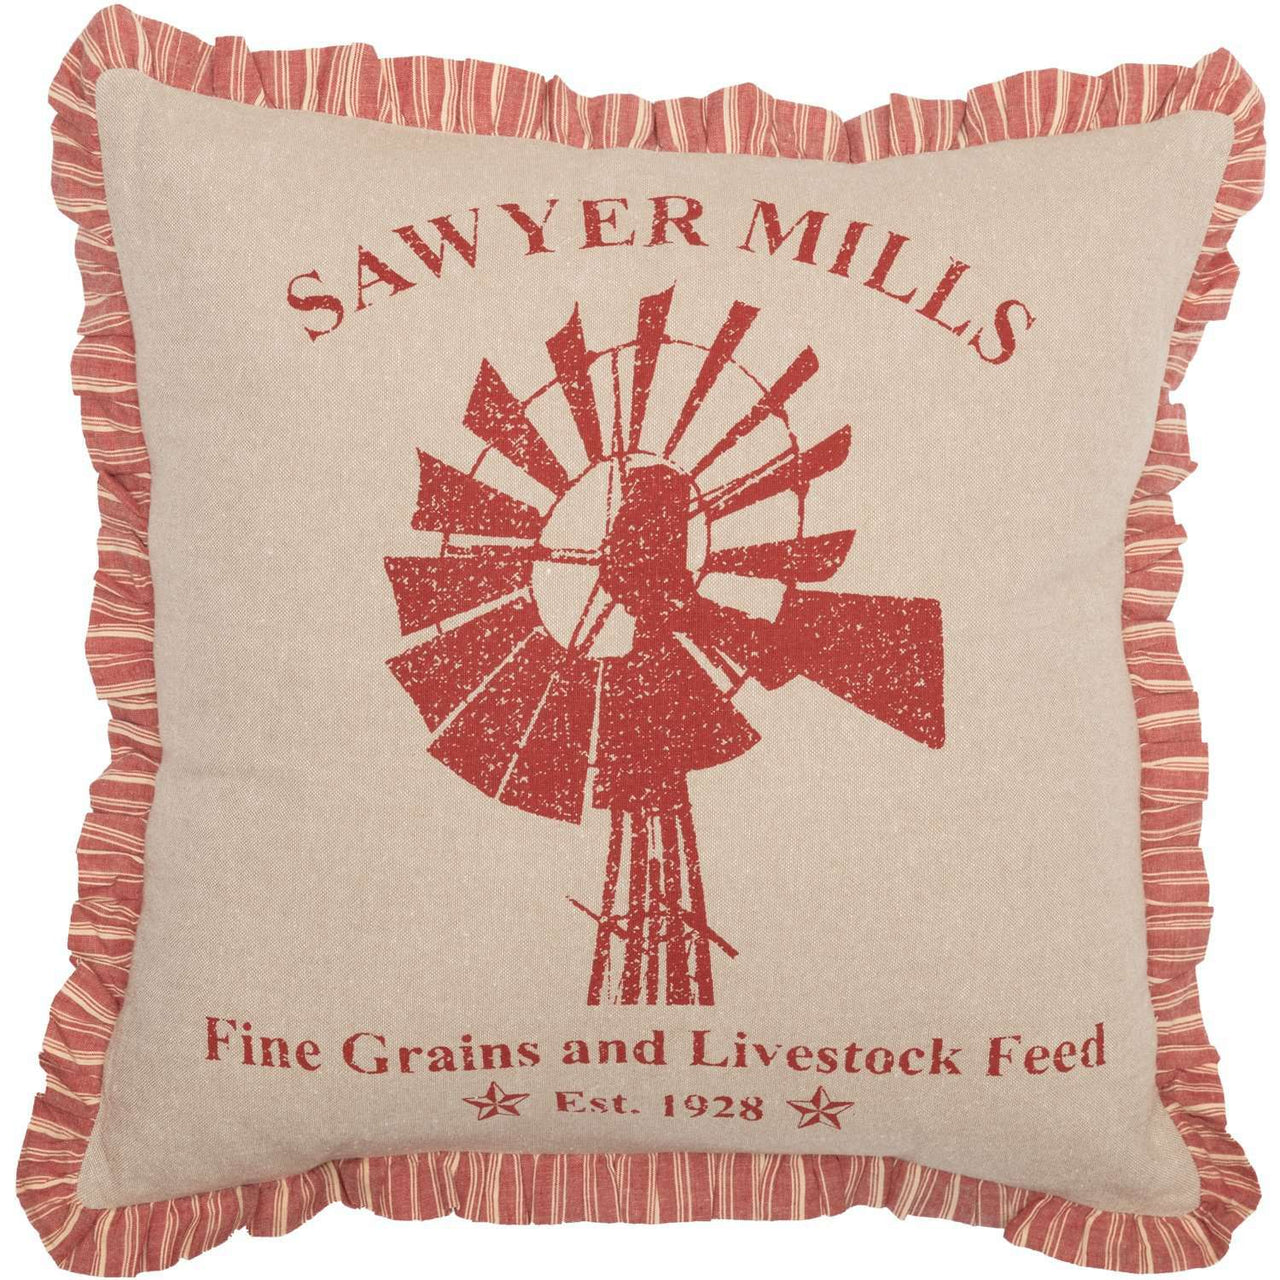 Sawyer Mill Charcoal Windmill Pillow Blue, Charcoal, Red Bedding VHC Brands Red 